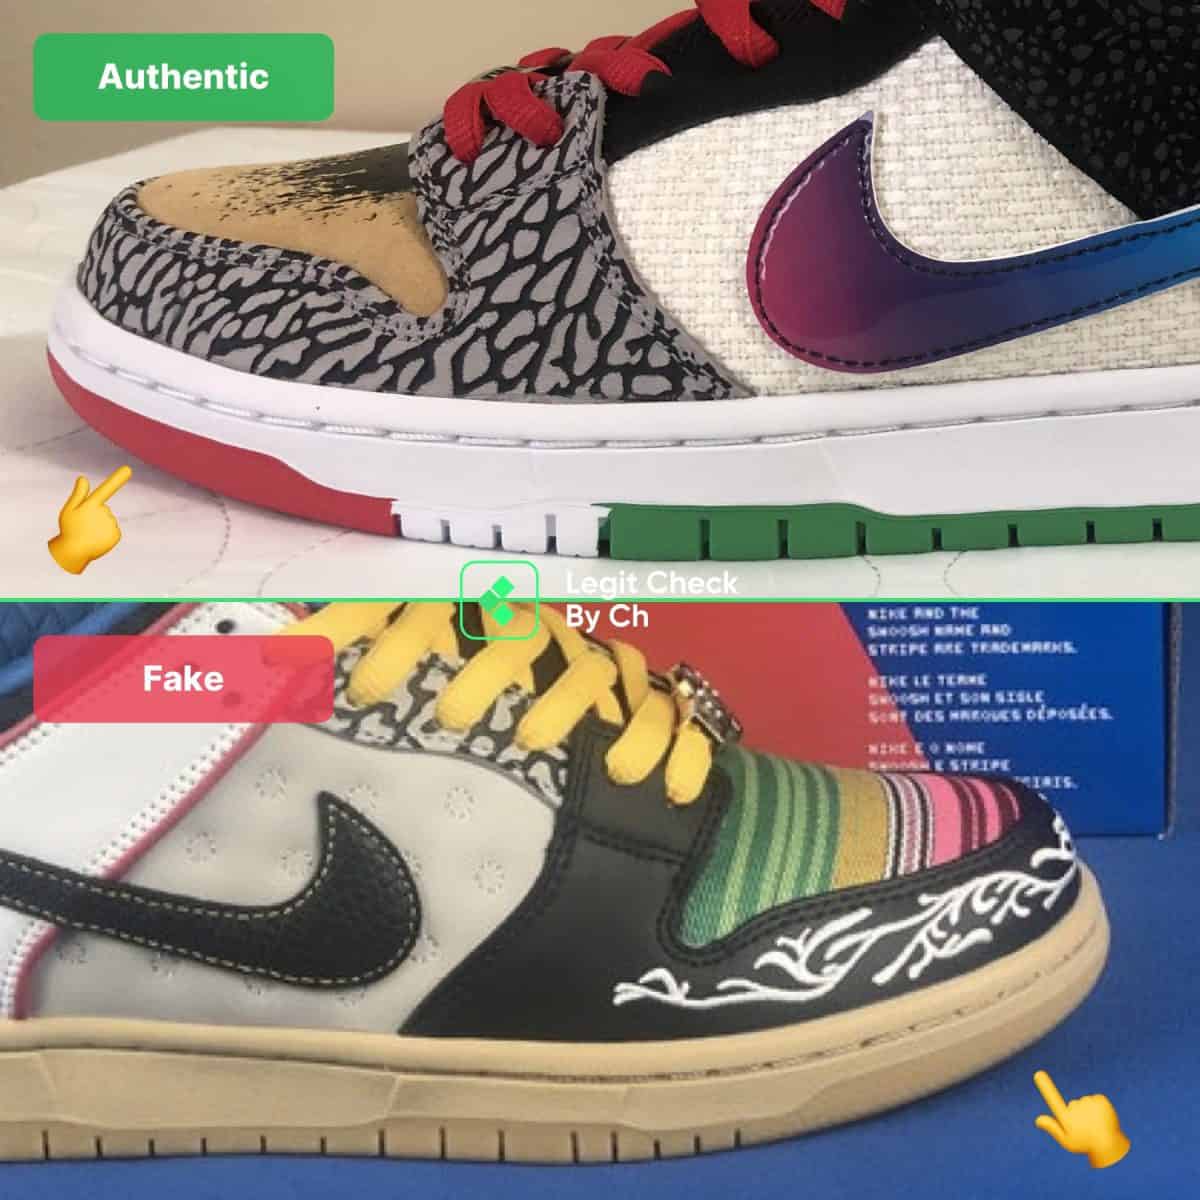 qc lc what the p-rod dunks